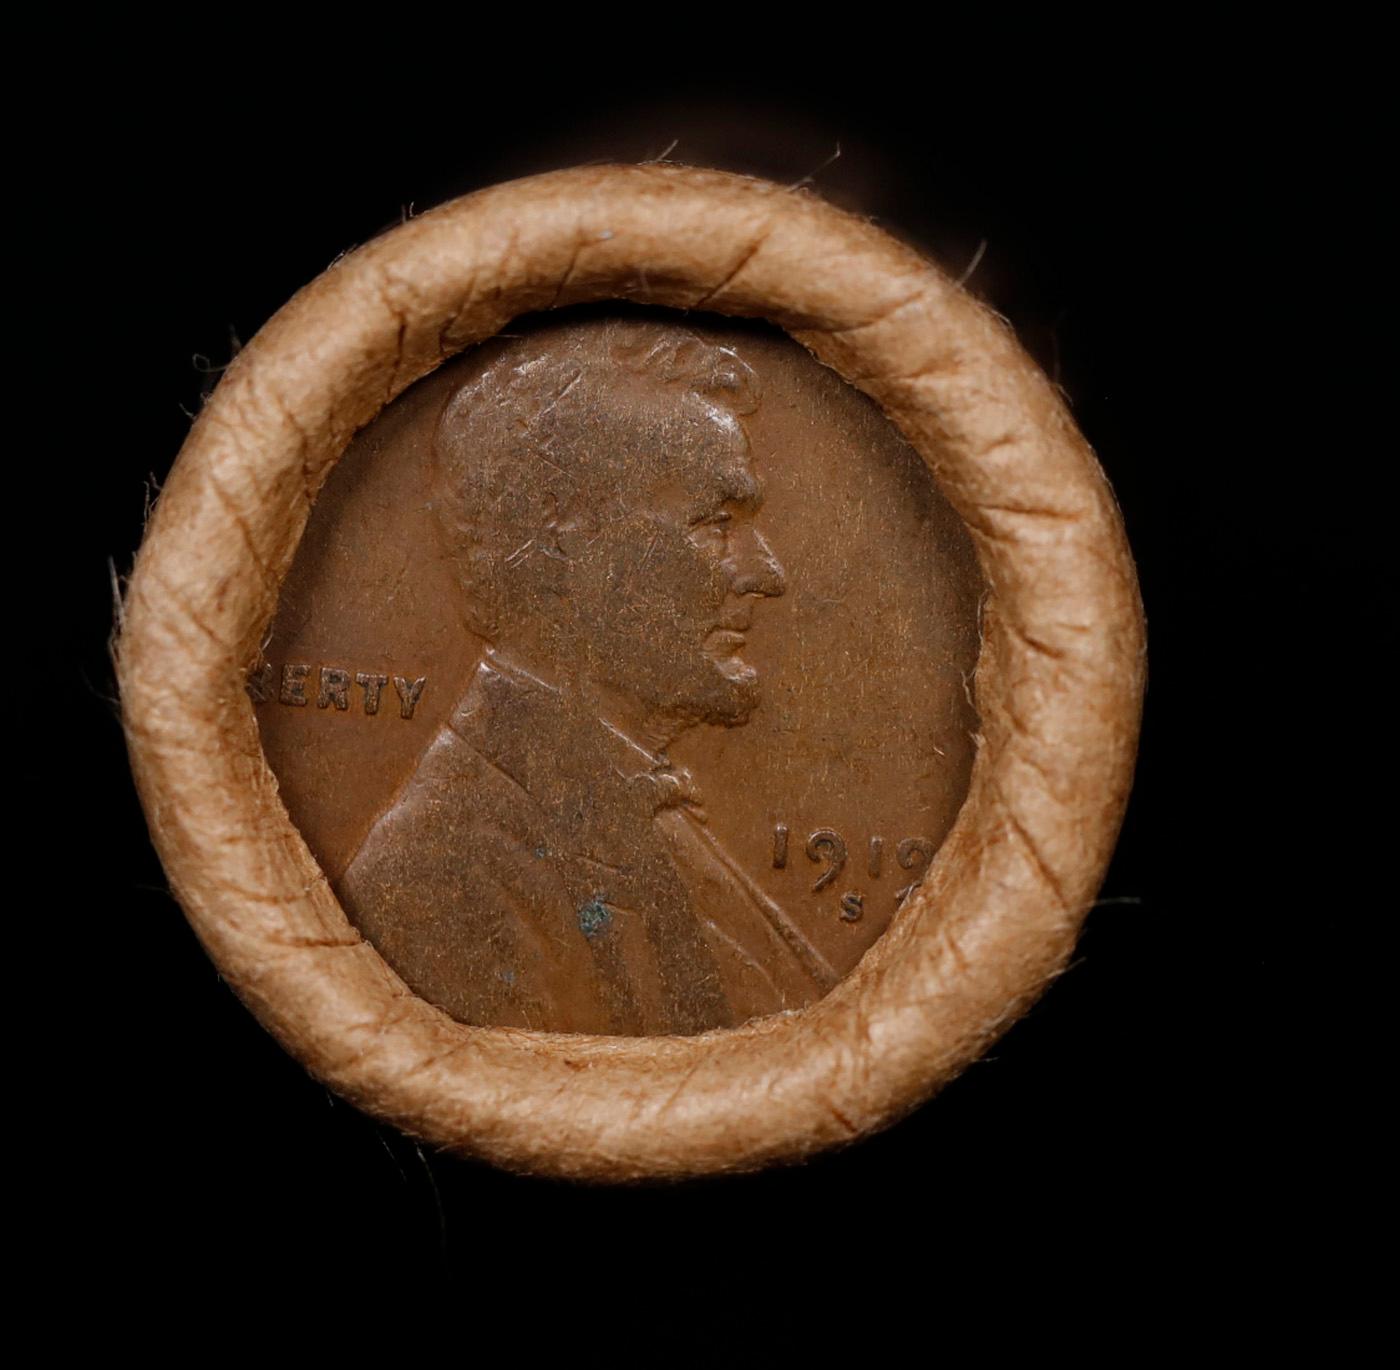 Small Cent Mixed Roll Orig Brandt McDonalds Wrapper, 1919-s Lincoln Wheat end, 1906 Indian other end